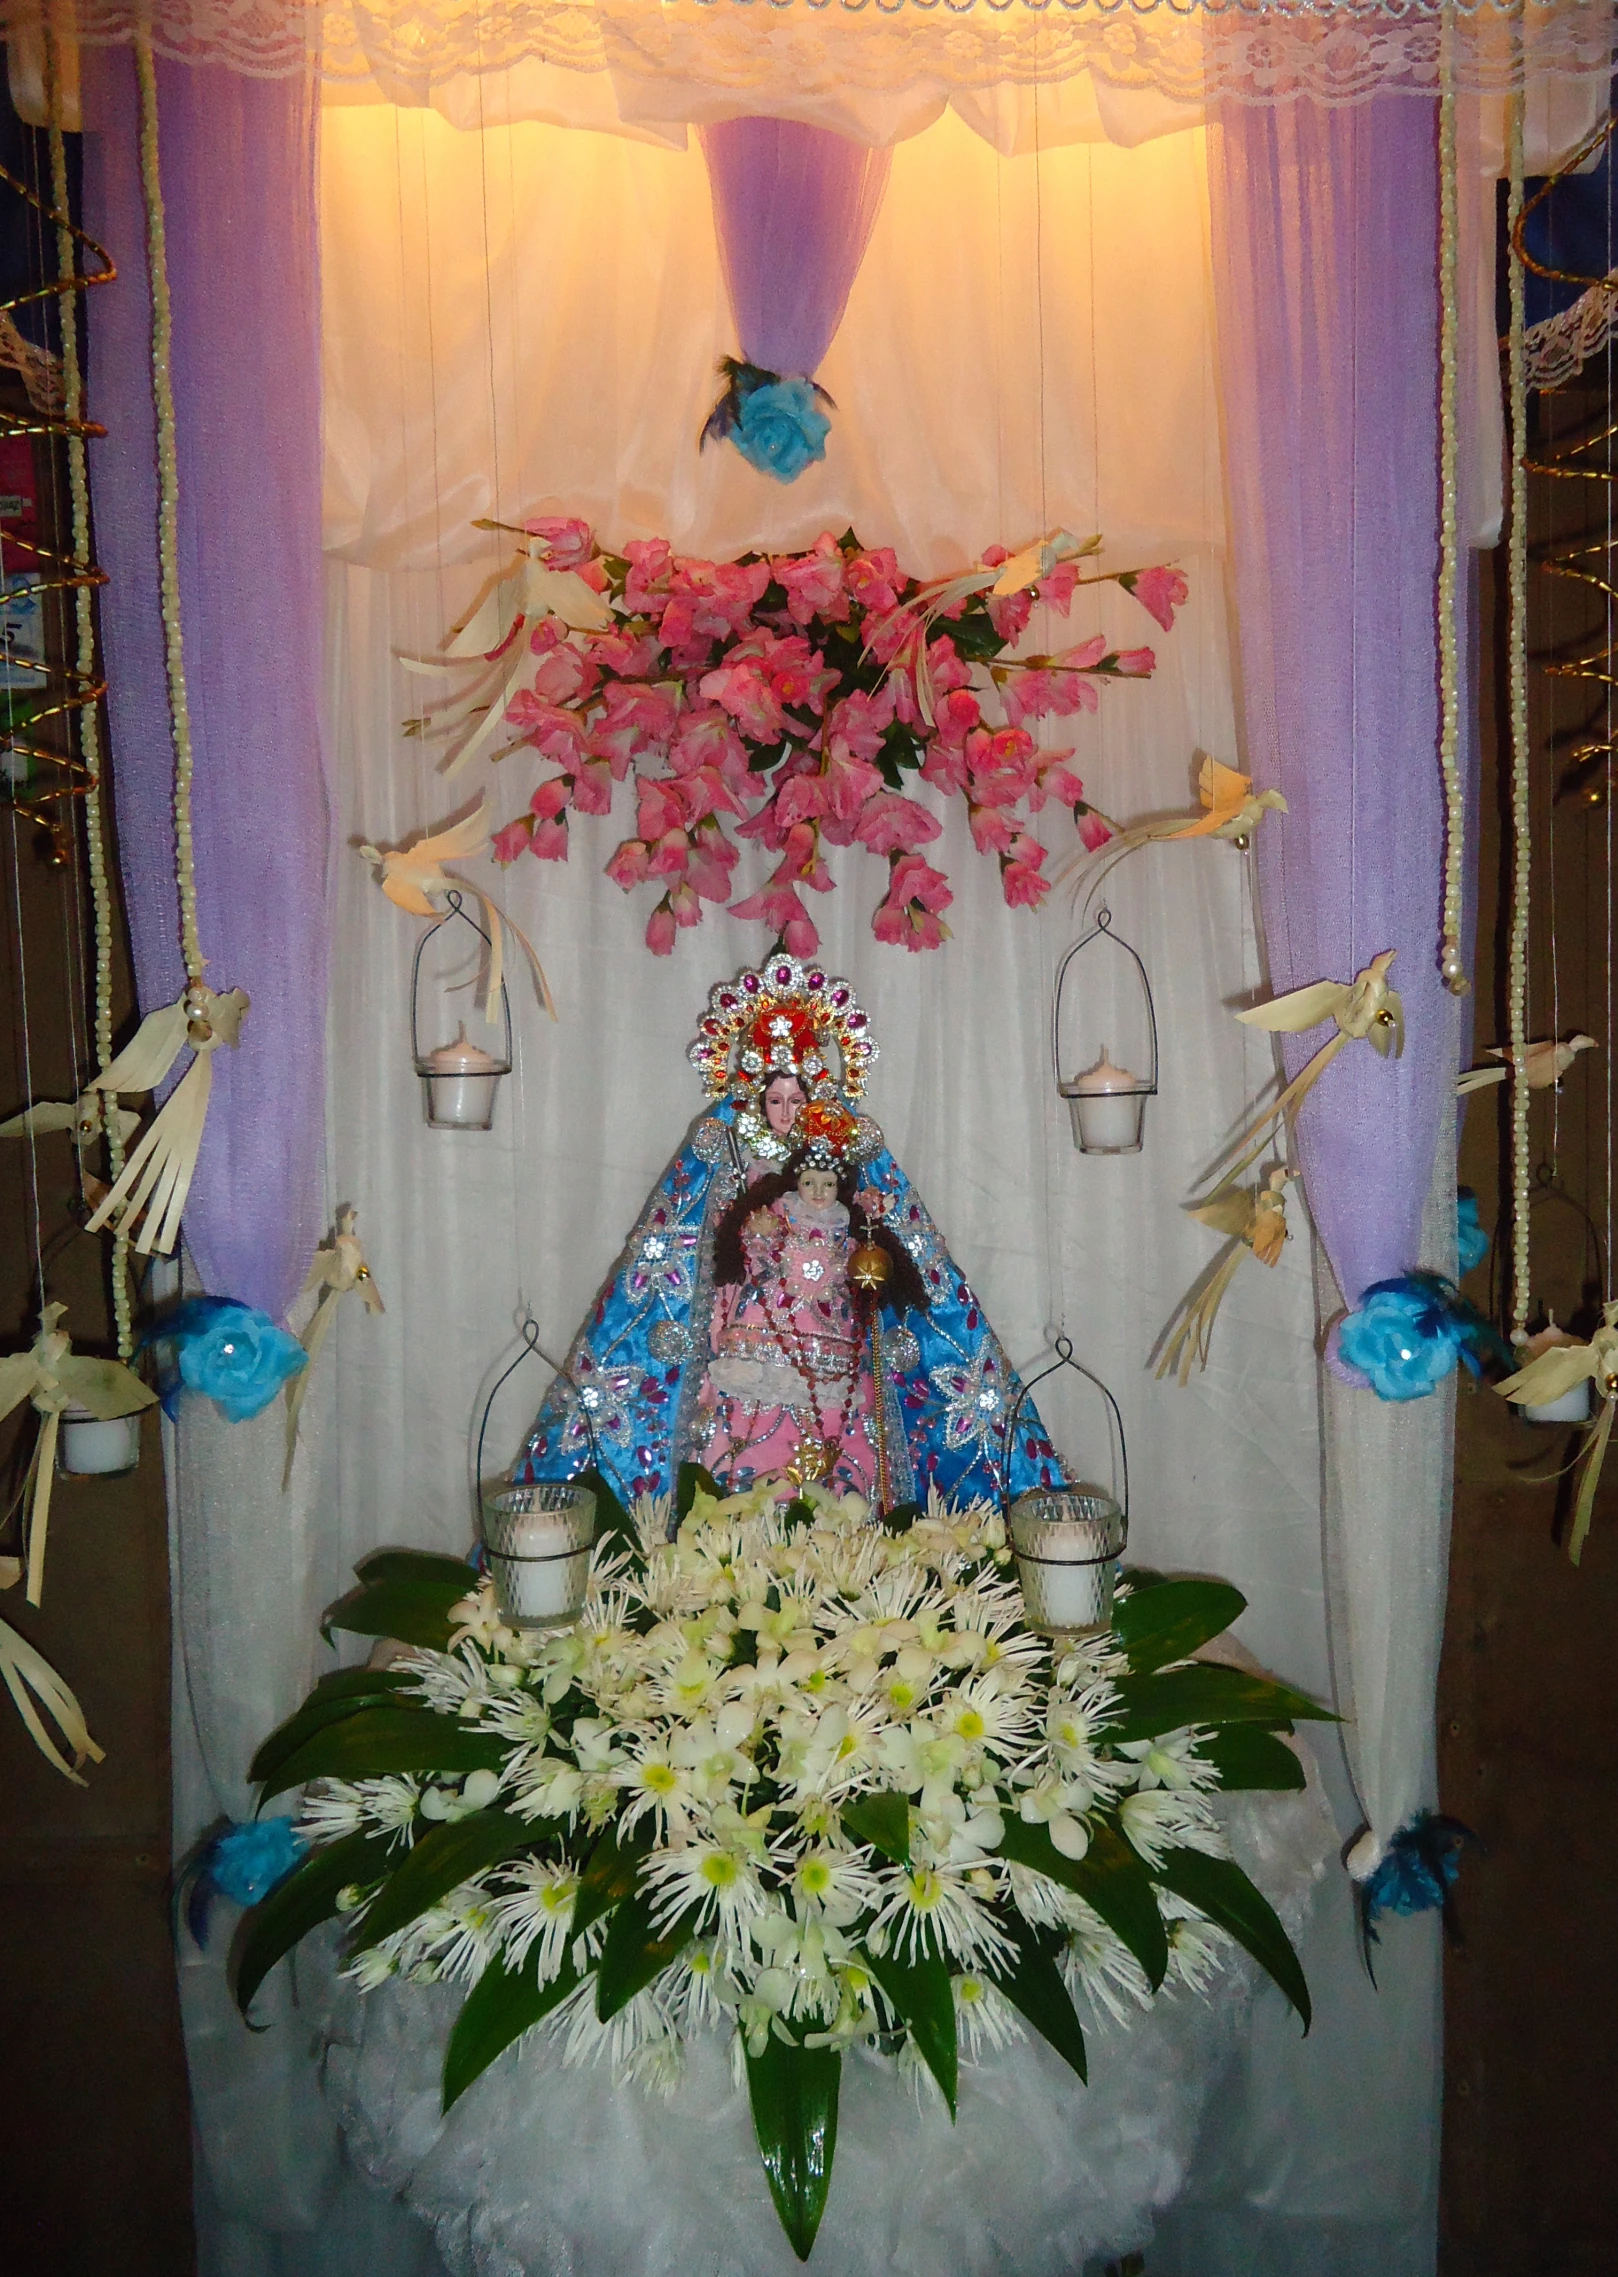 a shrine decorated in flowers and decorations on a table